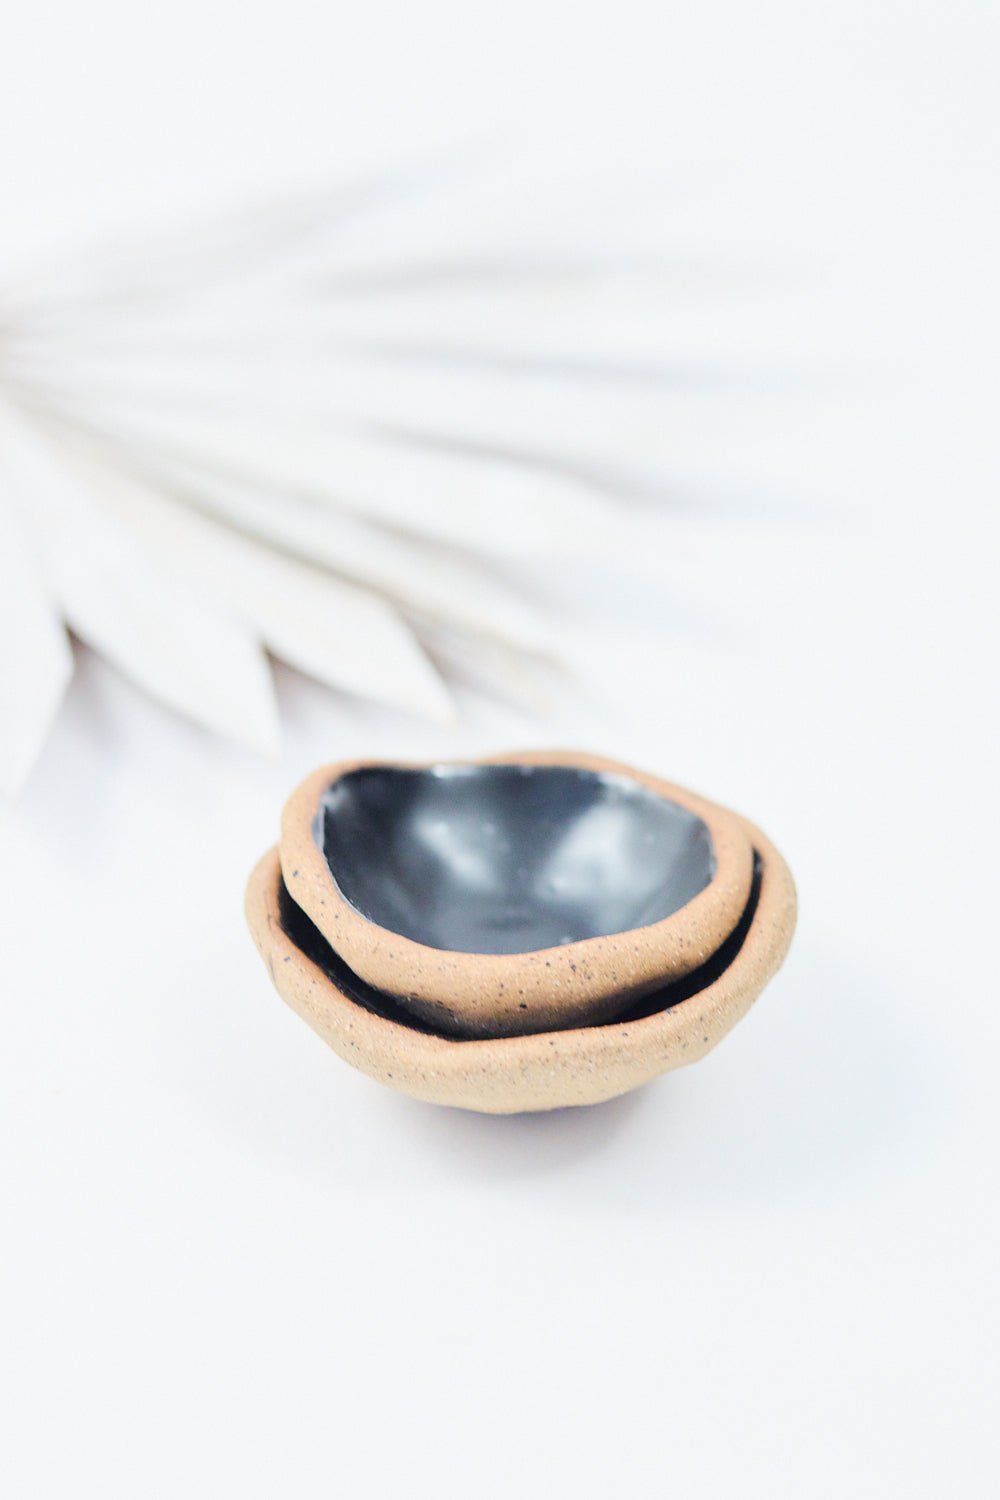 Ring Dish - Driftwood Maui & Home By Driftwood